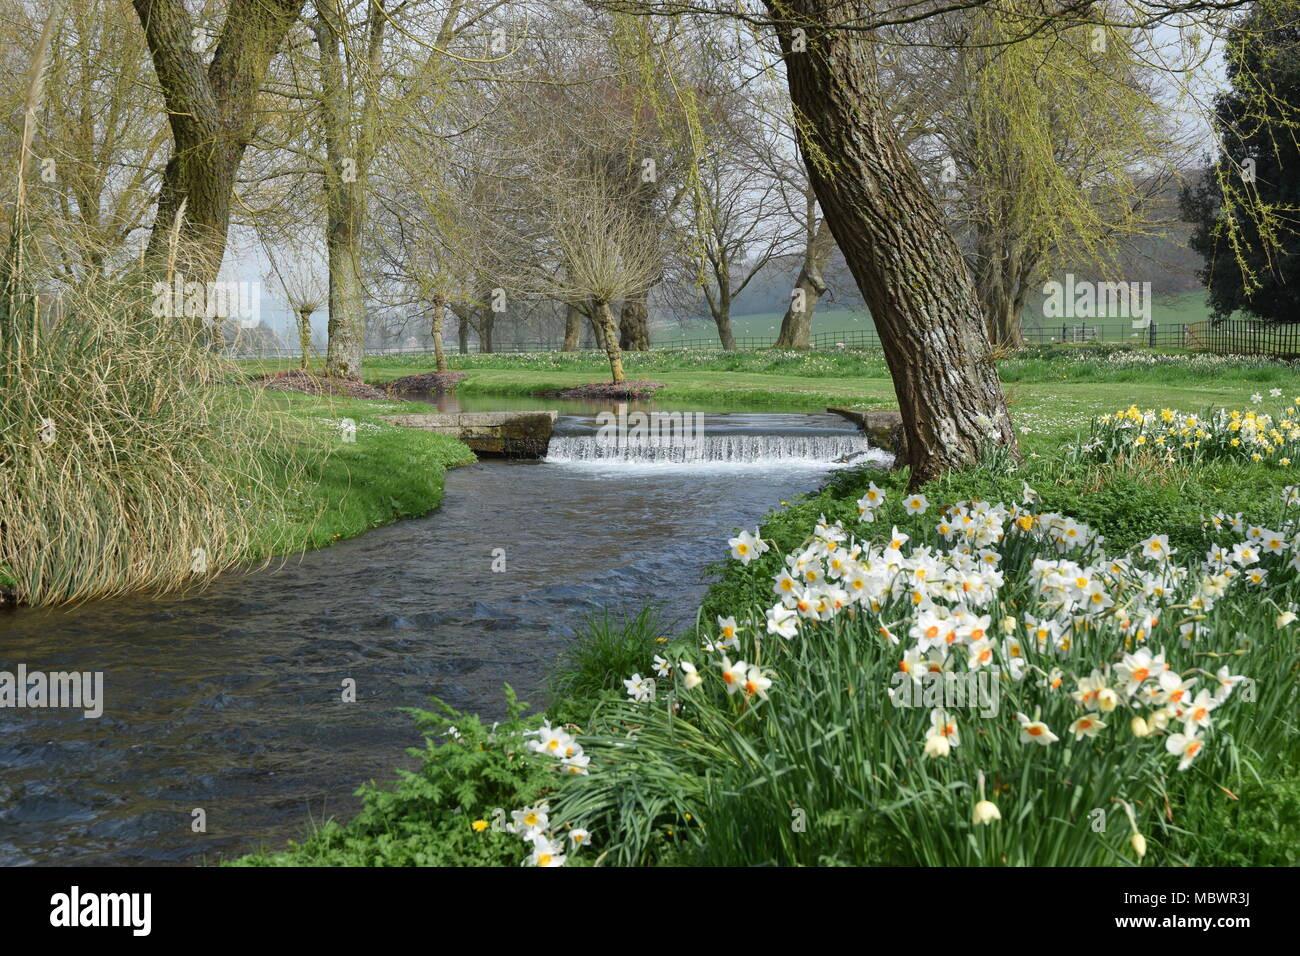 DAFFODILS ON THE BANK OF THE RIVER LAVANT RUNNING THROUGH WEST DEAN GARDENS, CHICHESTER, WEST SUSSEX. APRIL 11TH 2018 Stock Photo